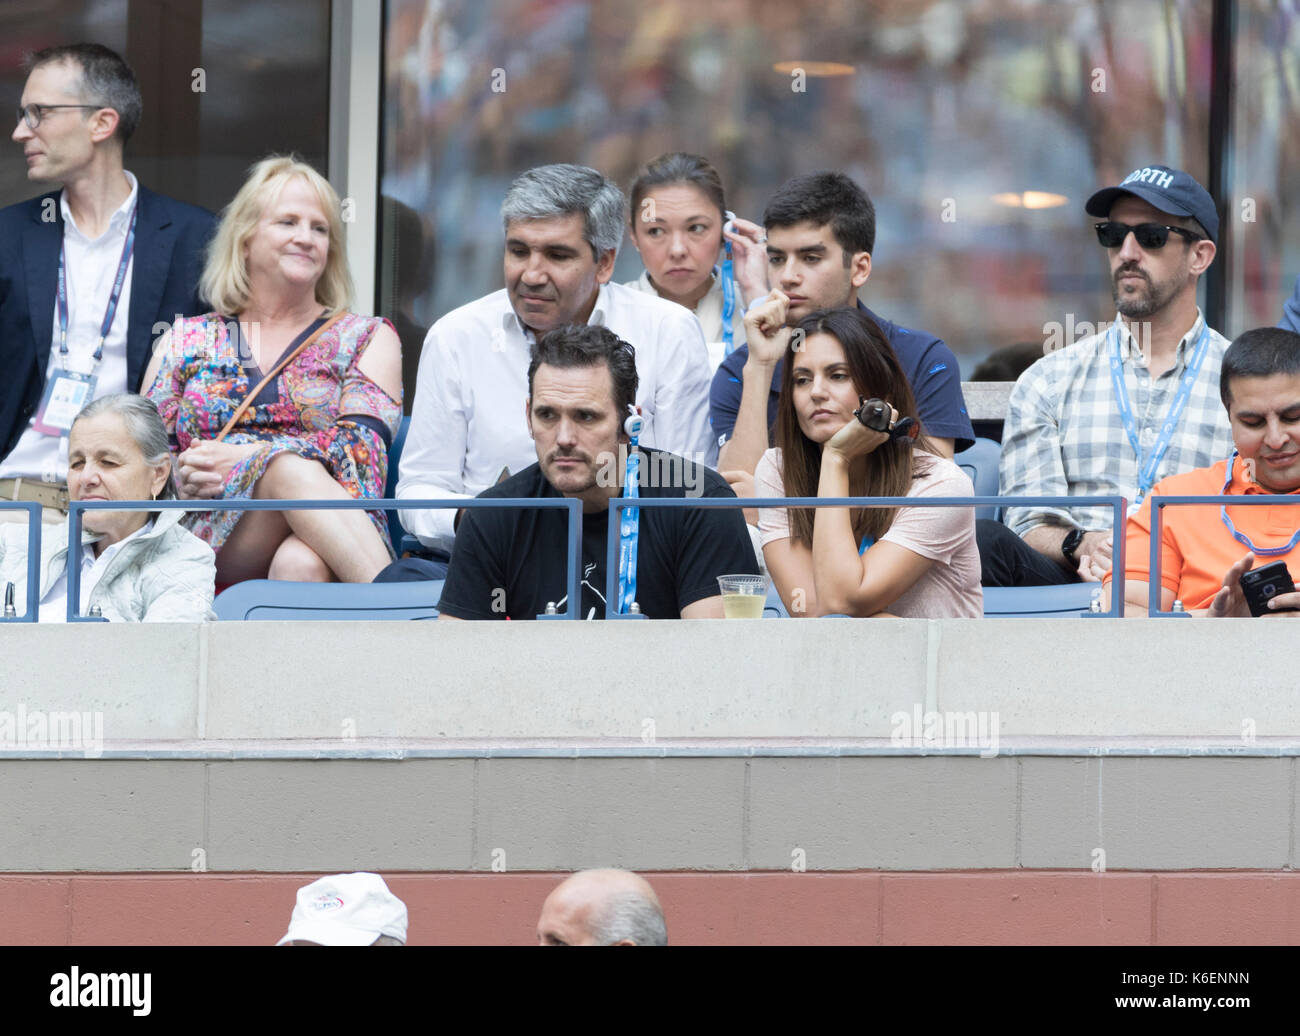 New York, NY USA - September 10, 2017: Matt Dillon attends final match between Rafael Nadal of Spain & Kevin Anderson of South Africa at US Open Championships at Billie Jean King National Tennis Center Stock Photo